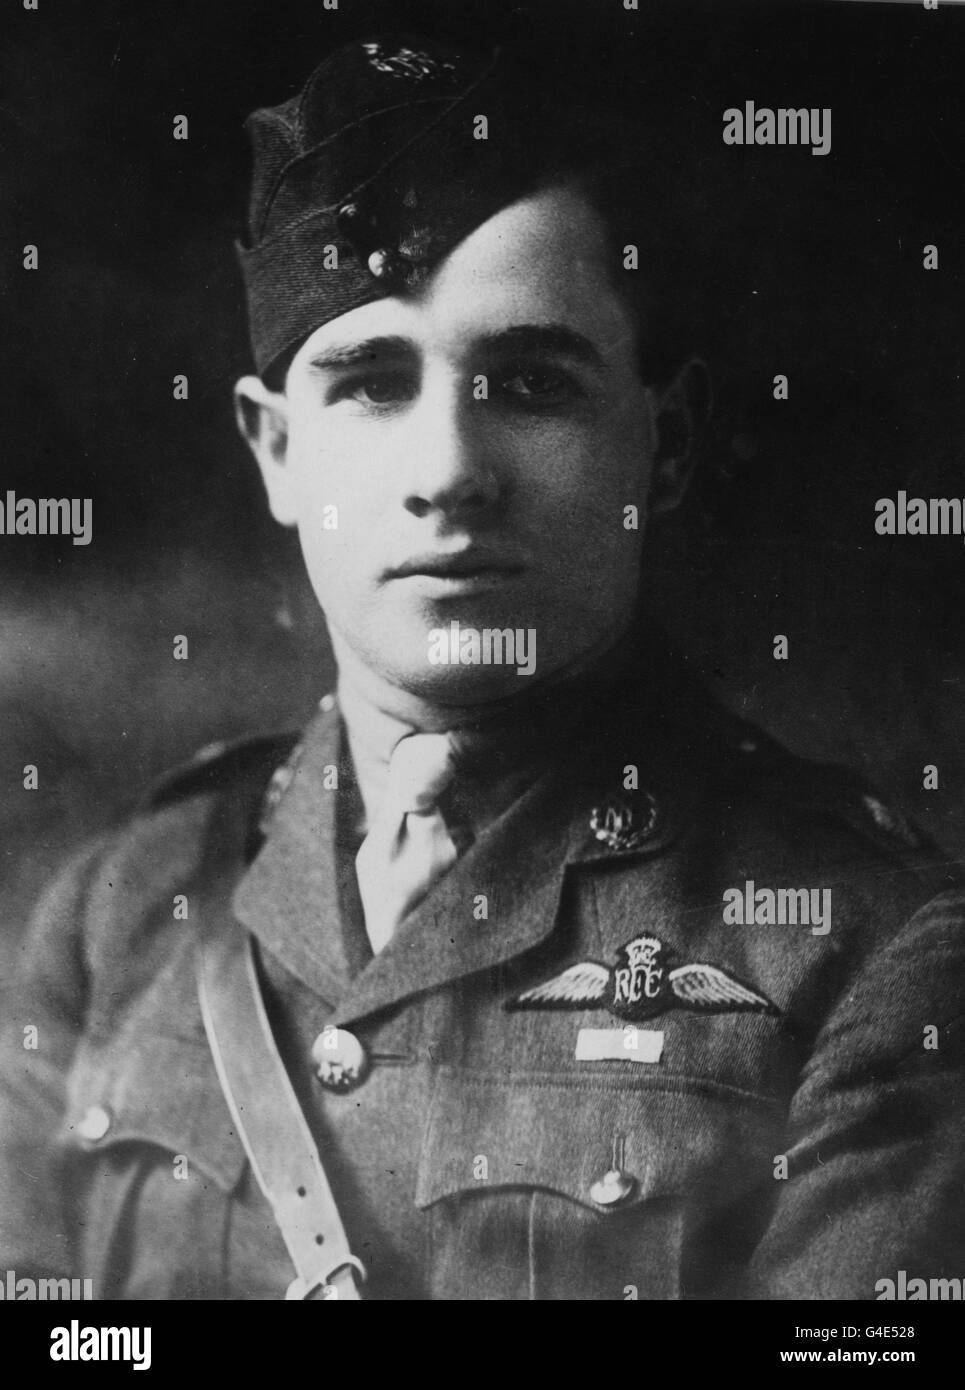 Lieutenant James McCudden V.C (1895-1918). Starting from the lowest possible status in the Army, McCudden became a leading fighter pilot and received seven gallantry awards, including the Victoria Cross. He died in a flying accident in France in 1918. Stock Photo